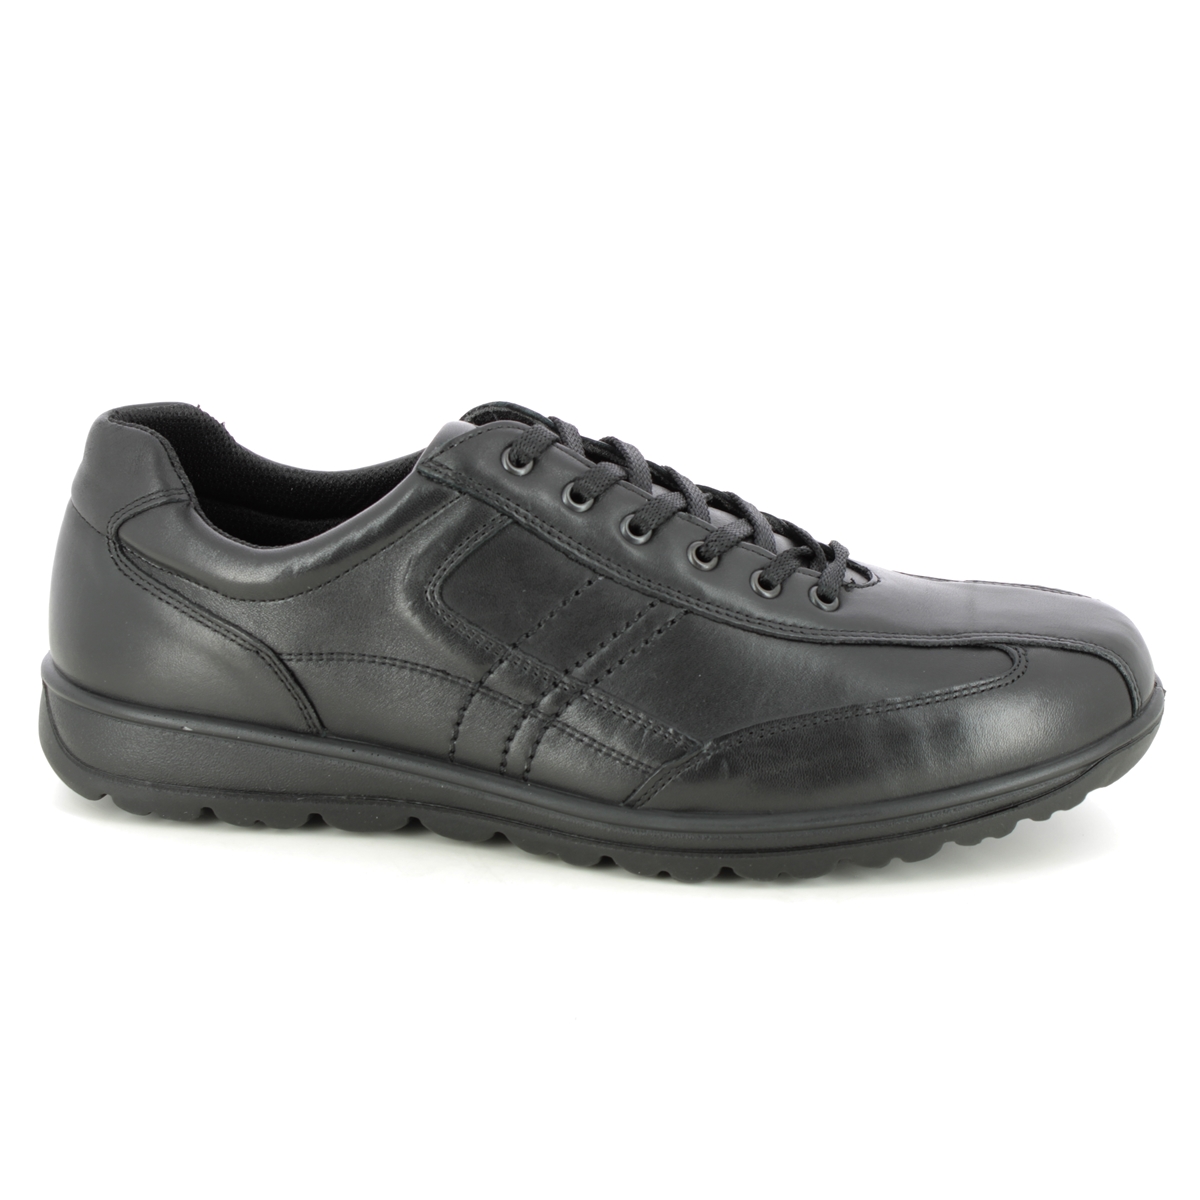 IMAC Relay Lace Black leather Mens comfort shoes 1780-2290011